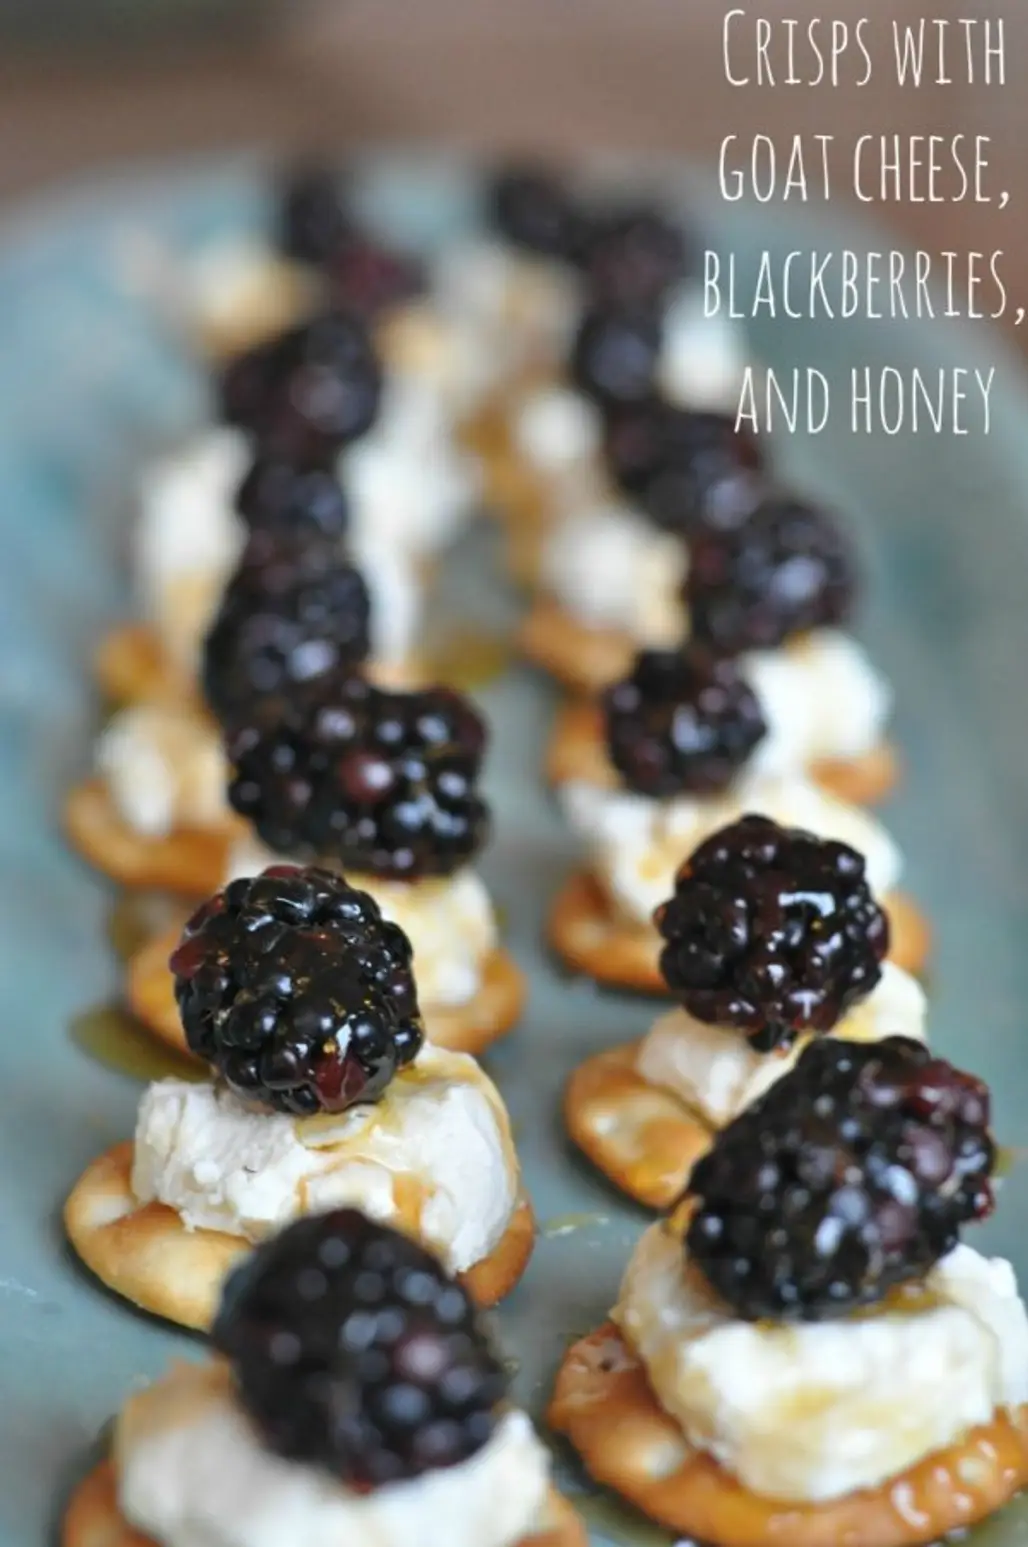 Goat Cheese with Blackberries and Honey